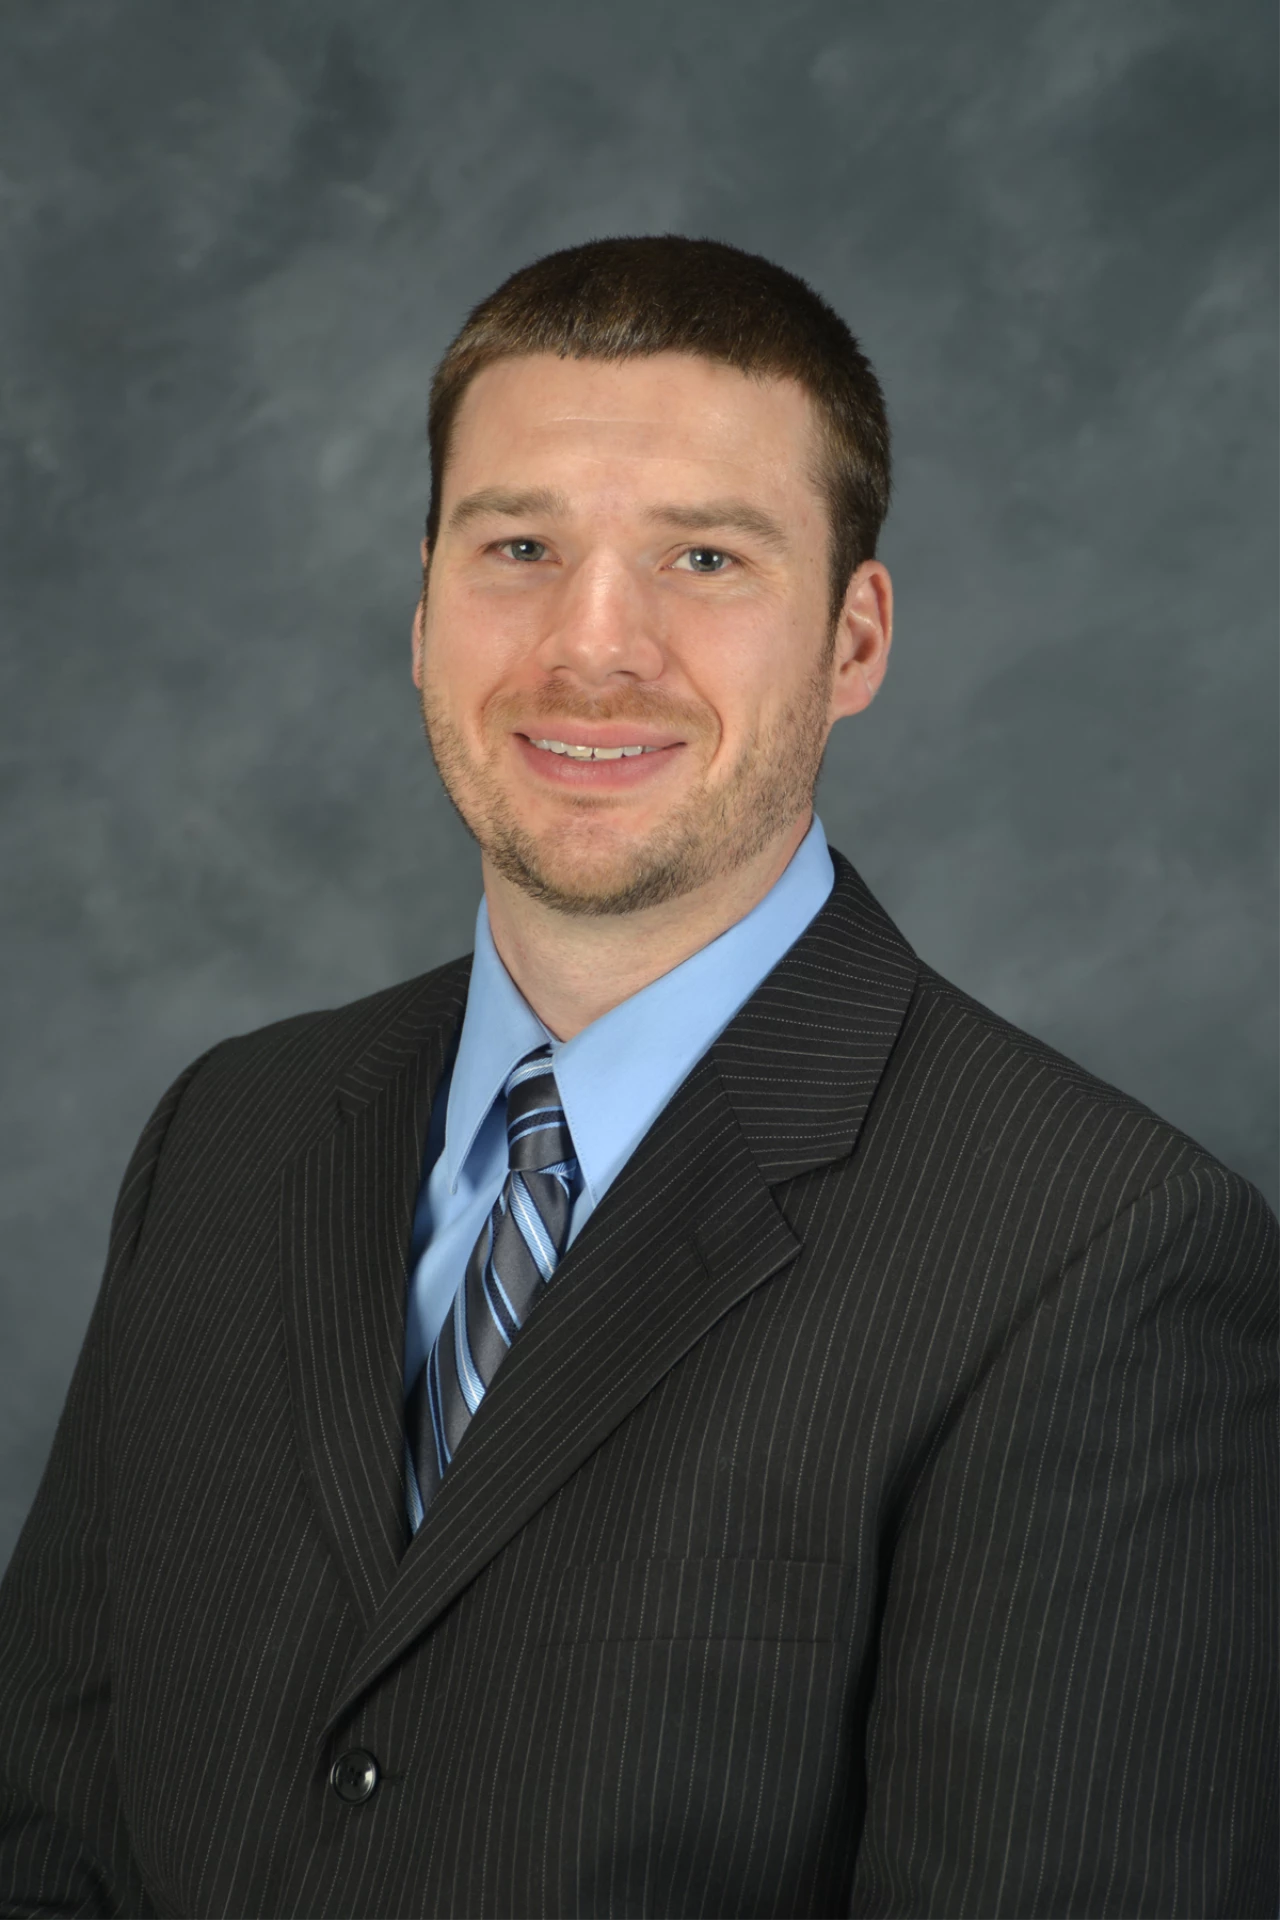 Jeremy Berger - General Surgery doctor at Main Street Clinic